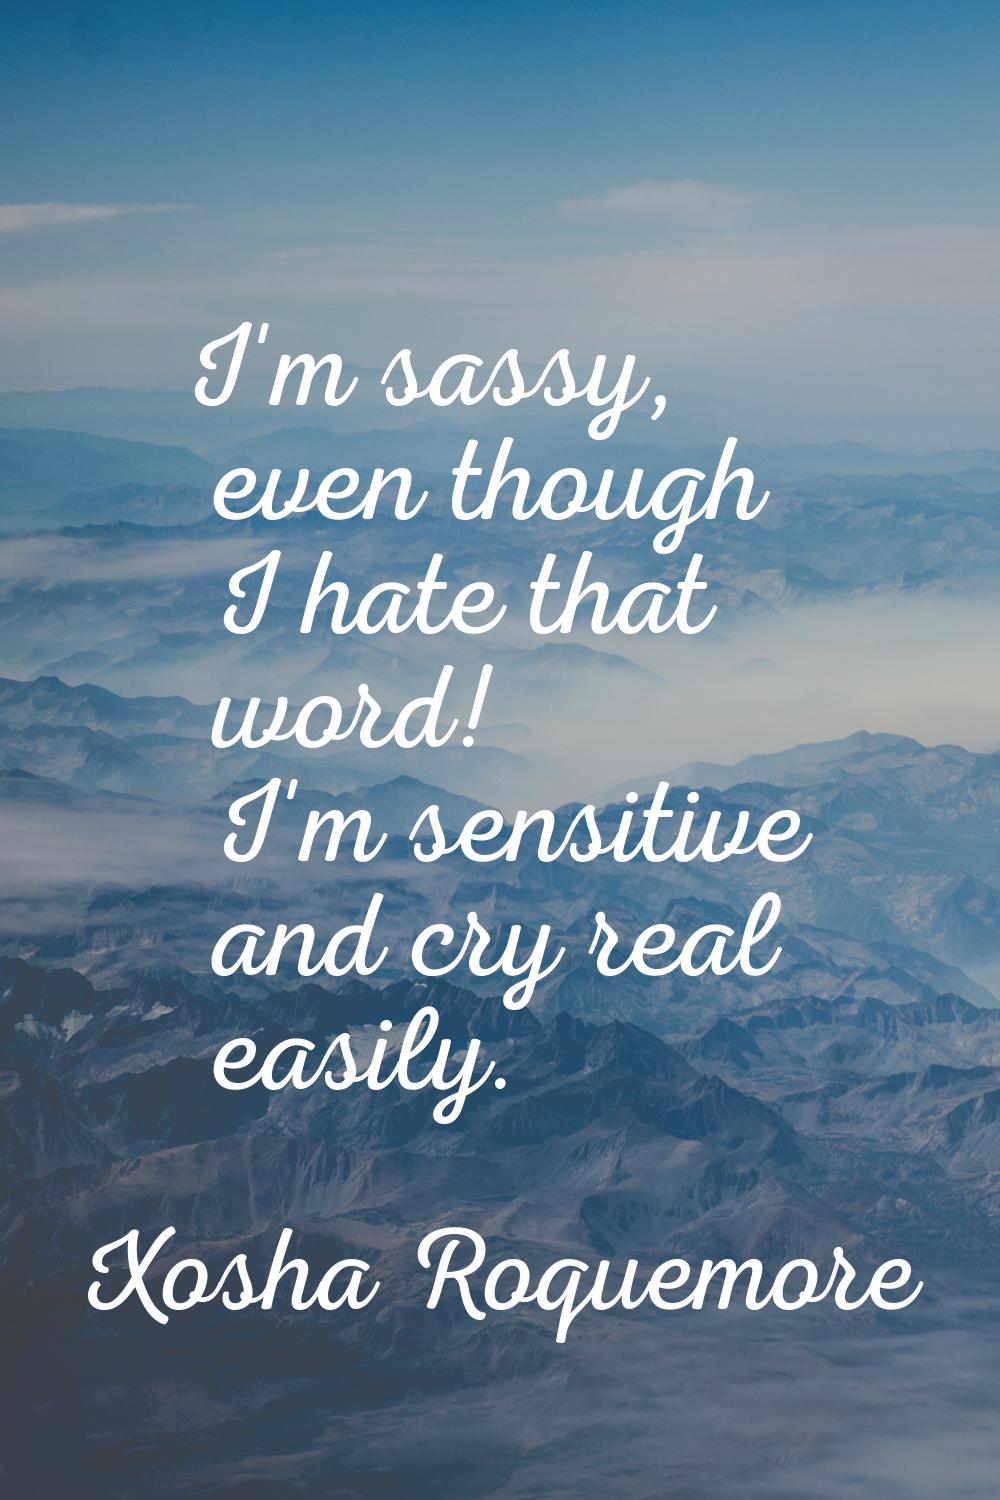 I'm sassy, even though I hate that word! I'm sensitive and cry real easily.